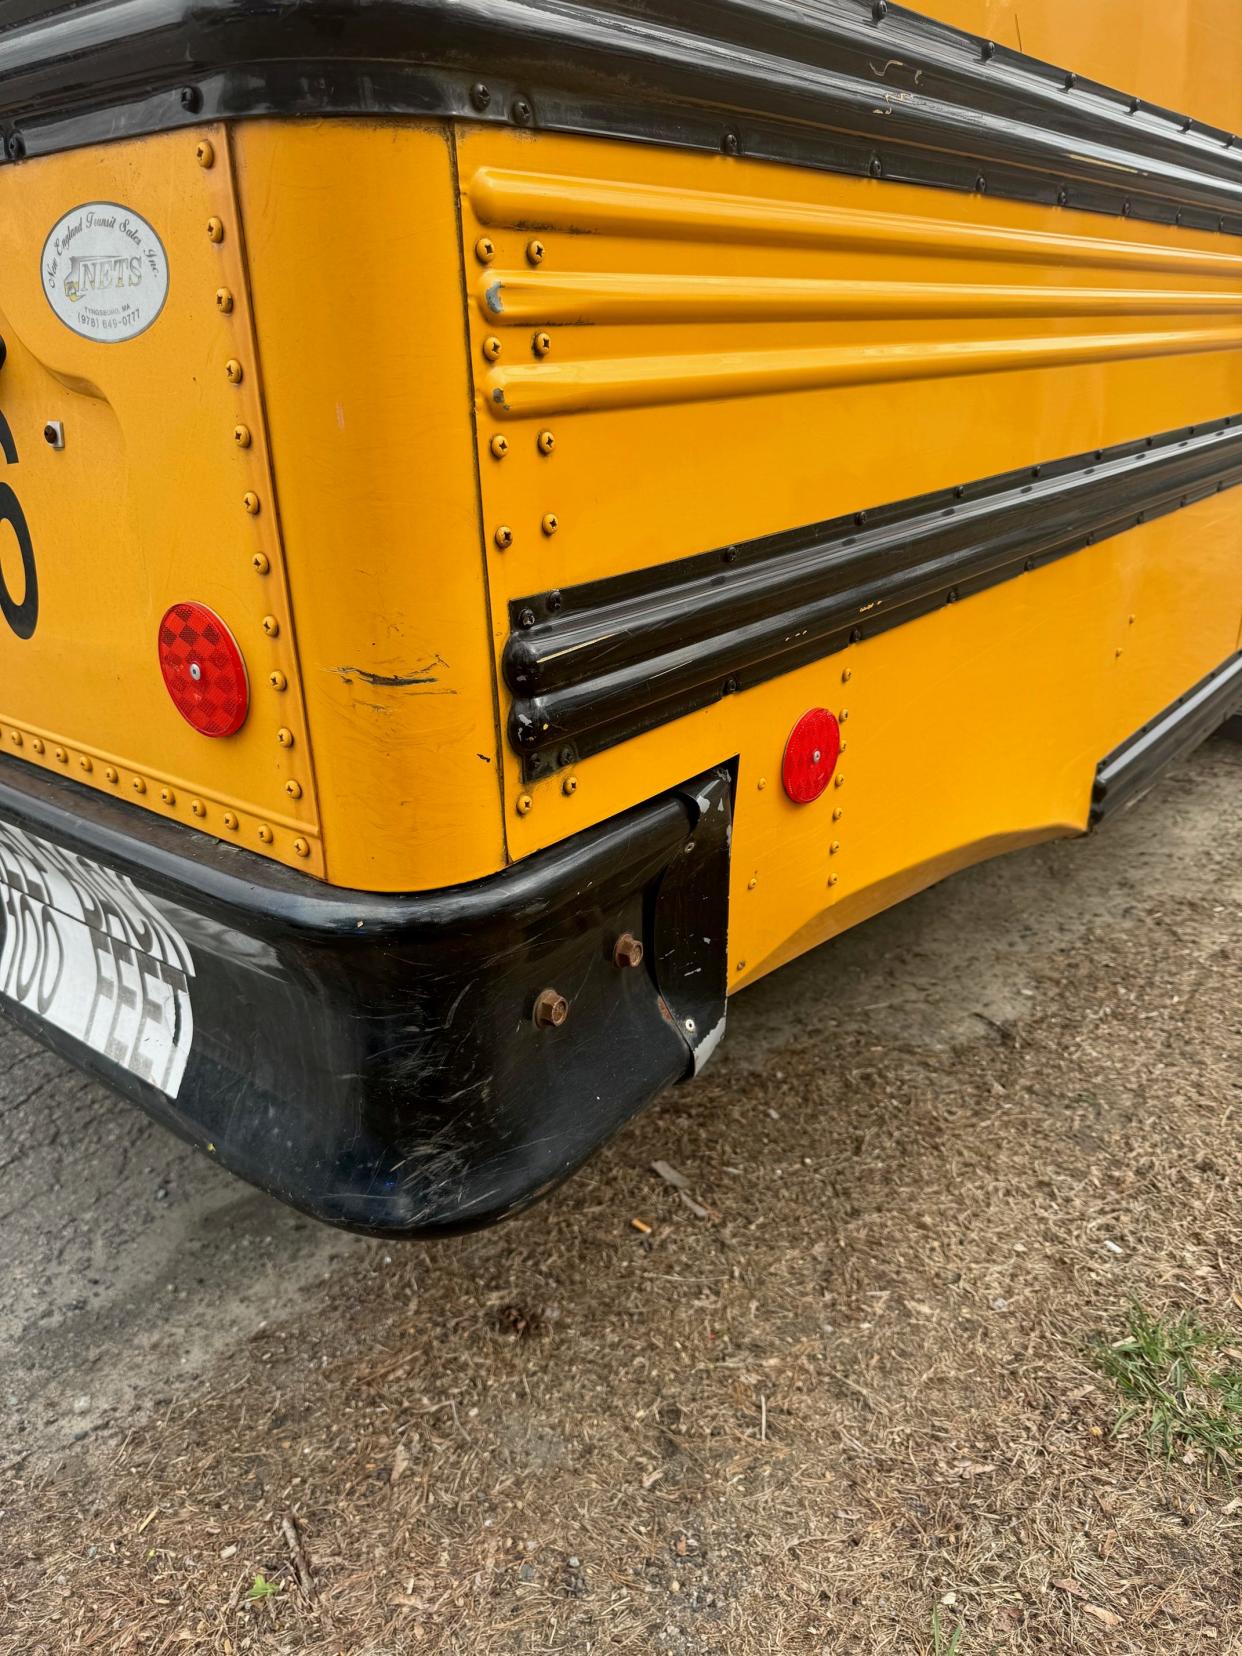 Millis police say this bus was damaged after its driver struck trash barrels while attempting a three-point turn on Village Street.